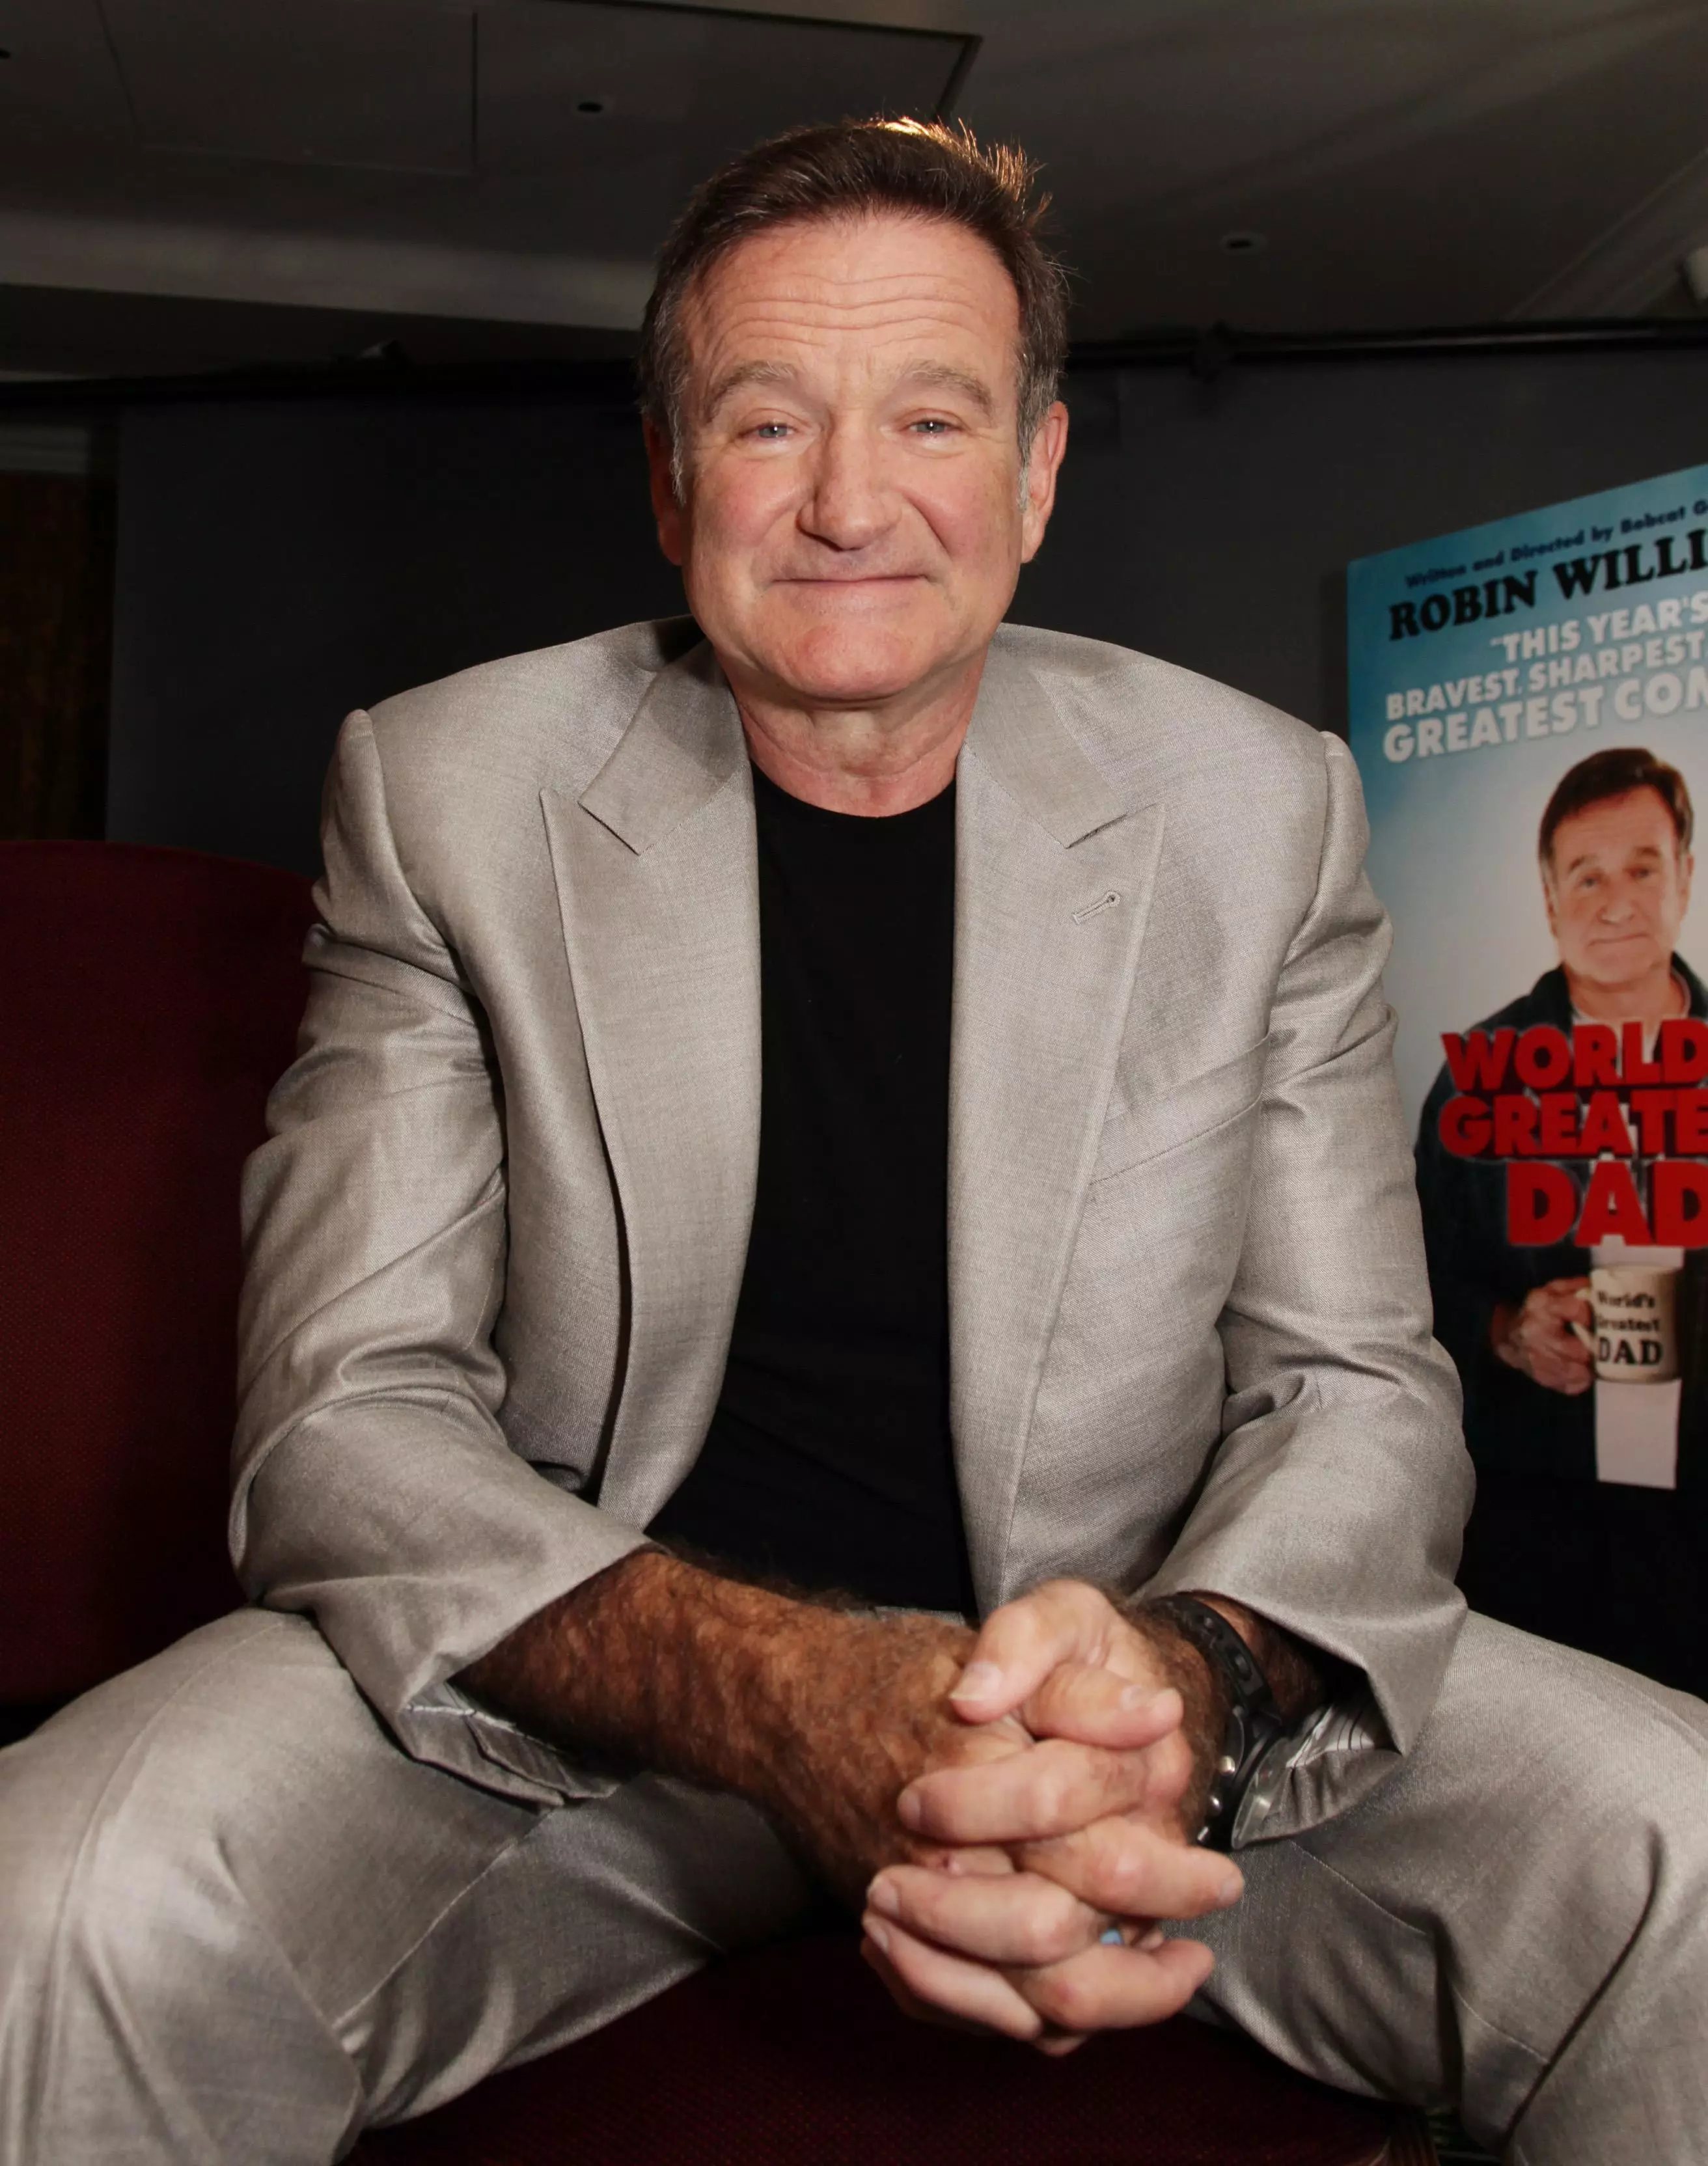 Robin Williams tragically passed away in 2014.